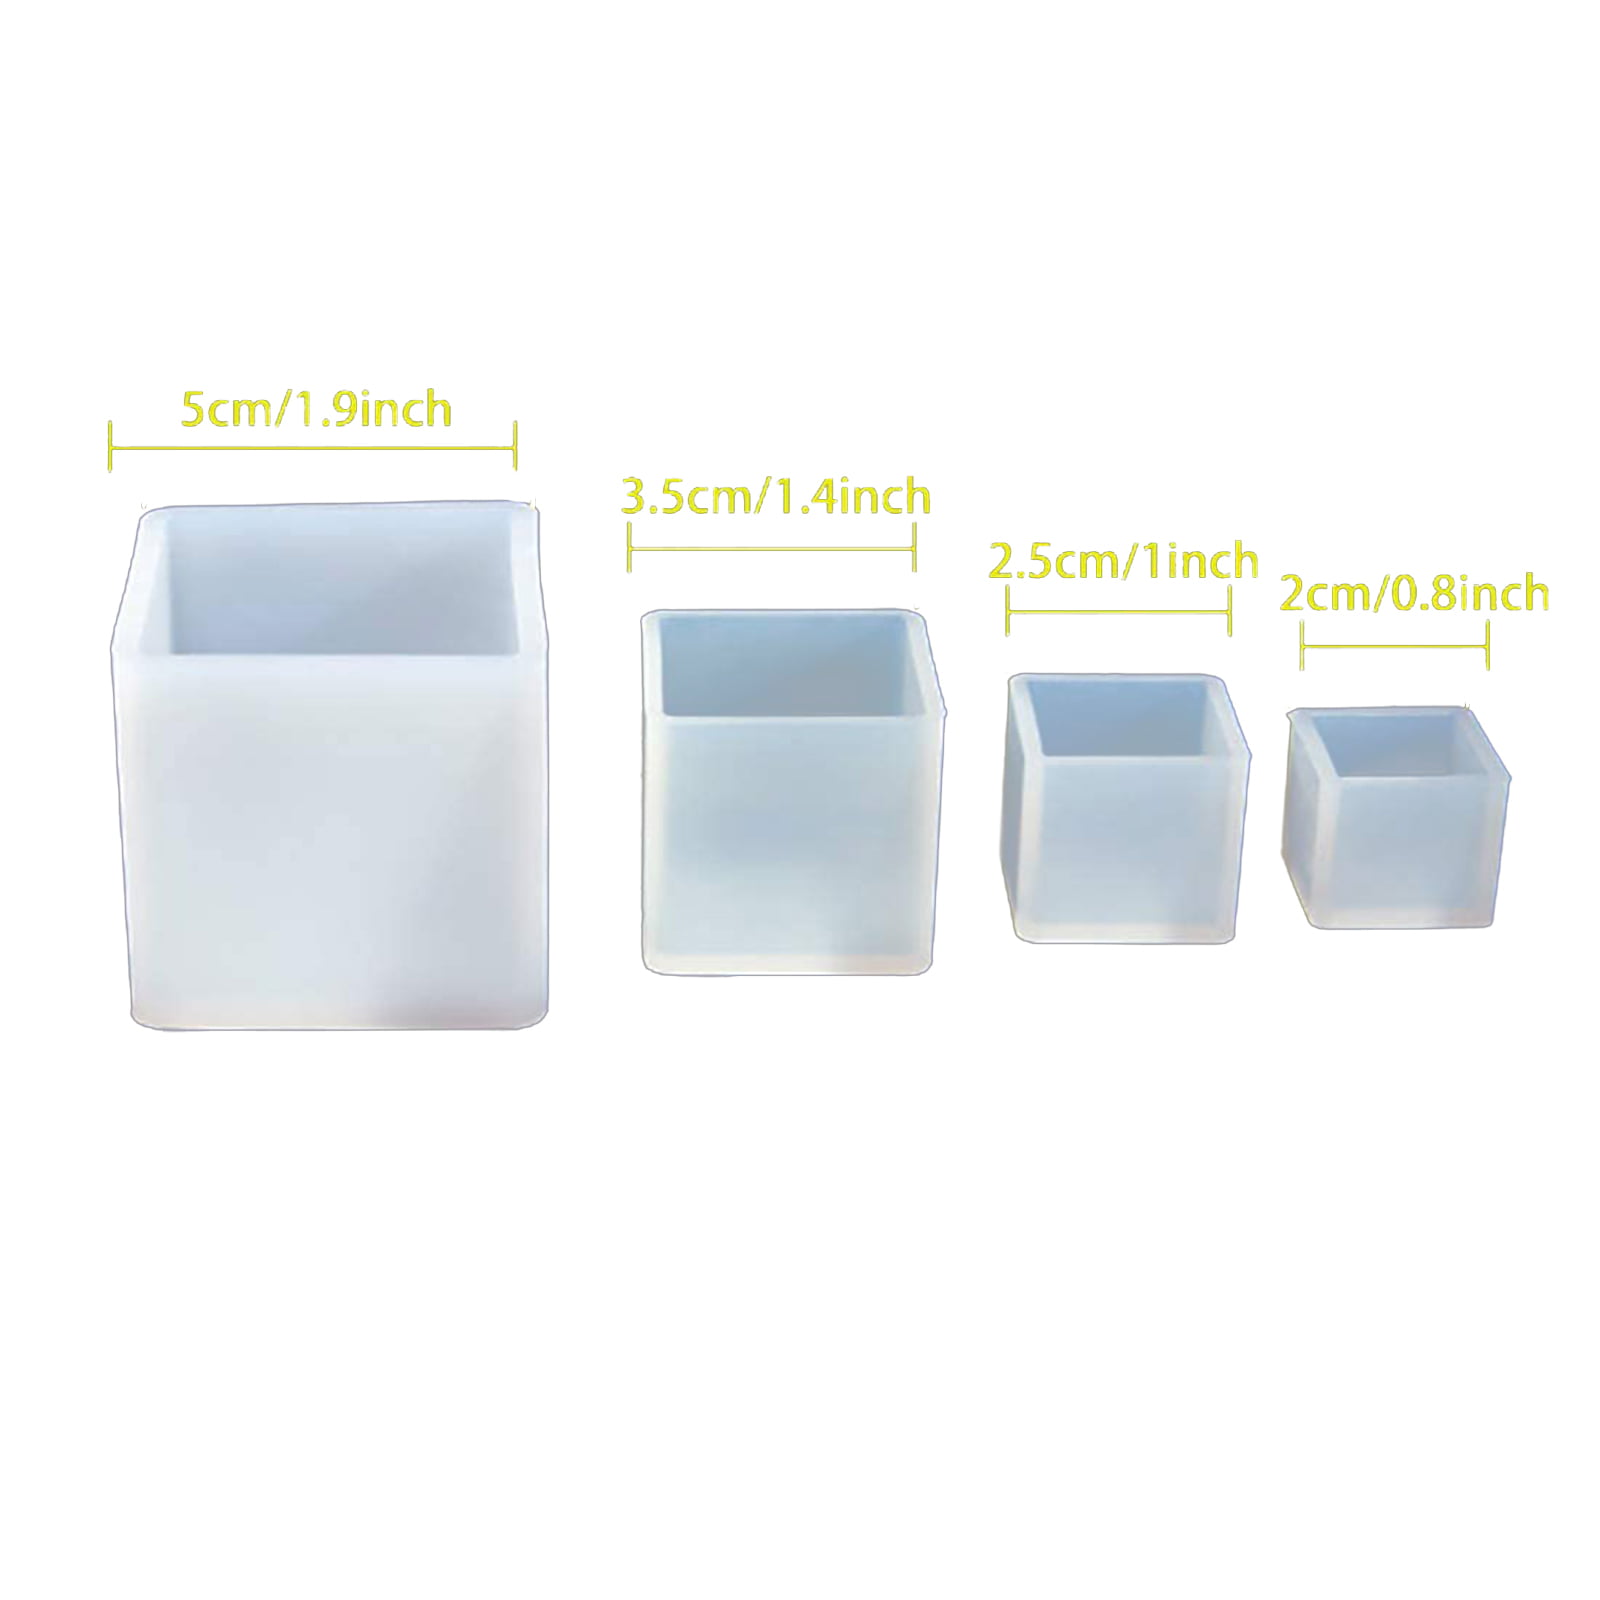  Pen Kit Mall - 4x4x4 Cube Silicone Molds Square Cube Silicone  Mold Resin Epoxy Casting Molds : Arts, Crafts & Sewing